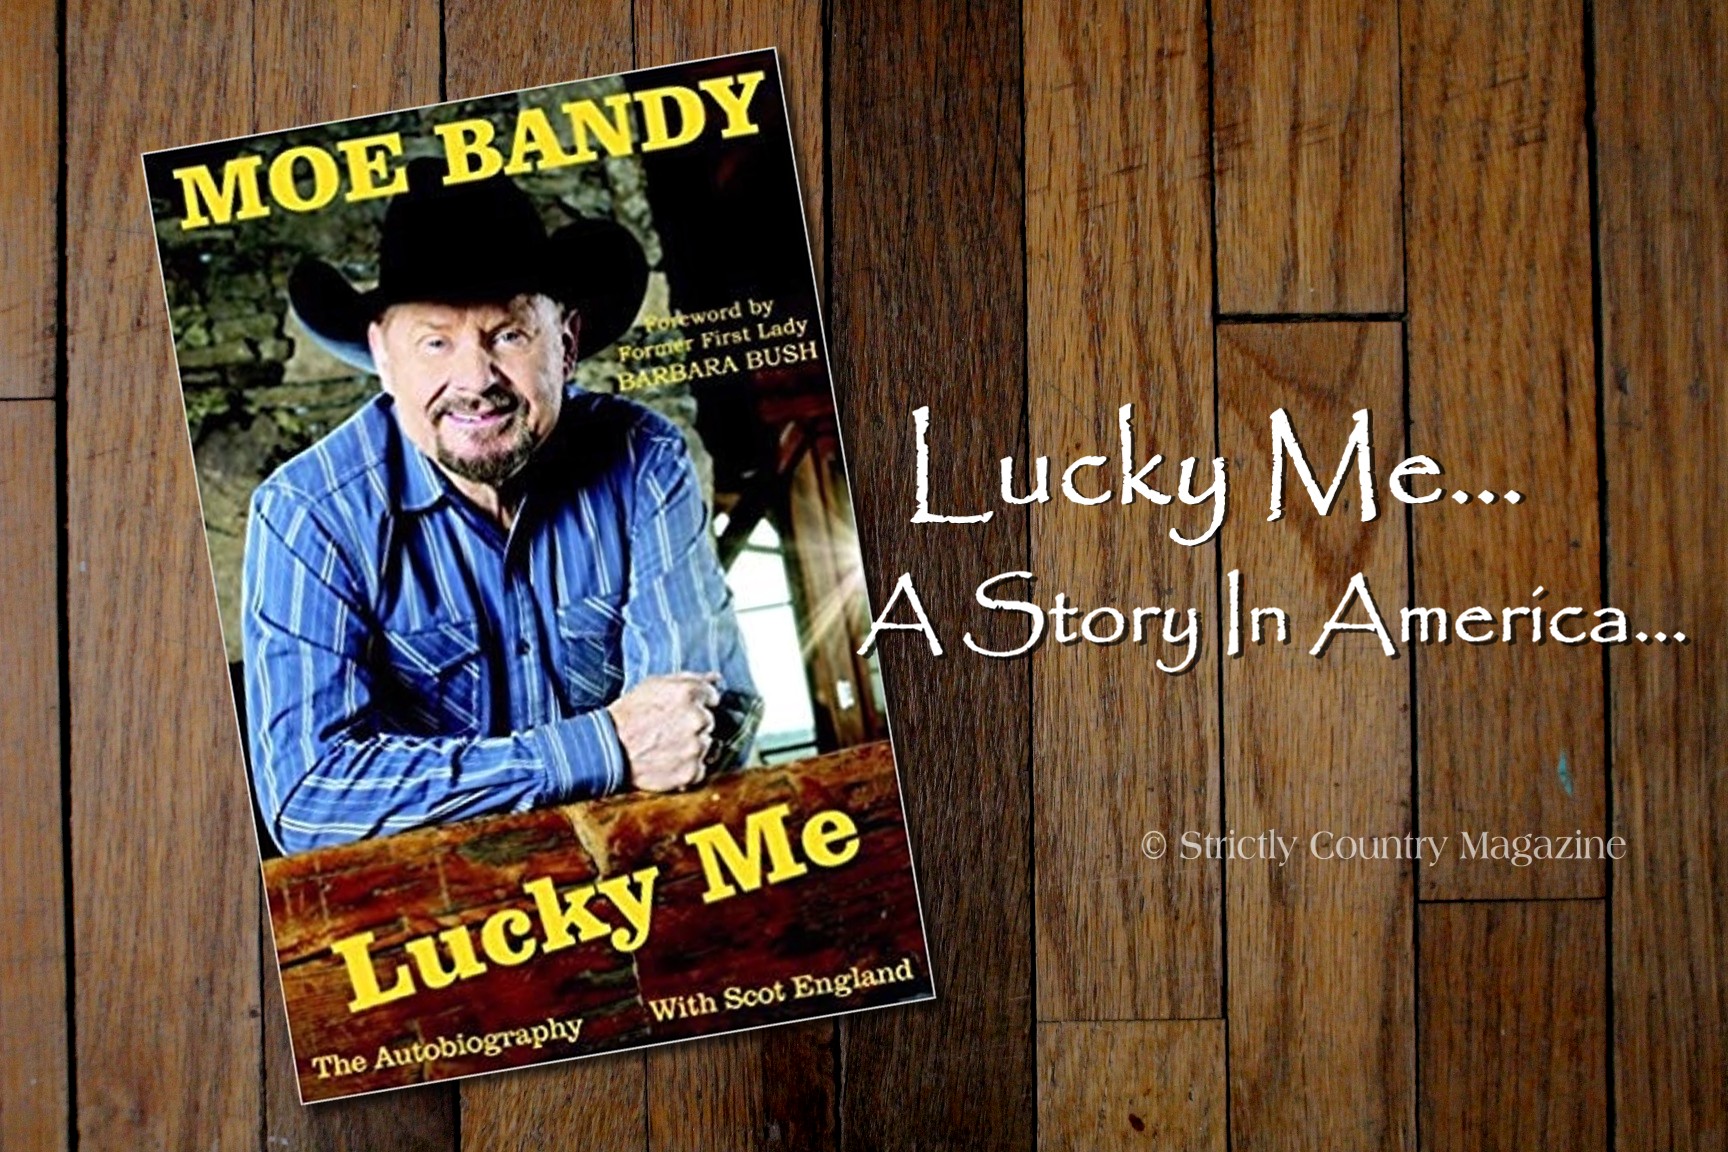 Strictly Country copyright Moe Bandy title